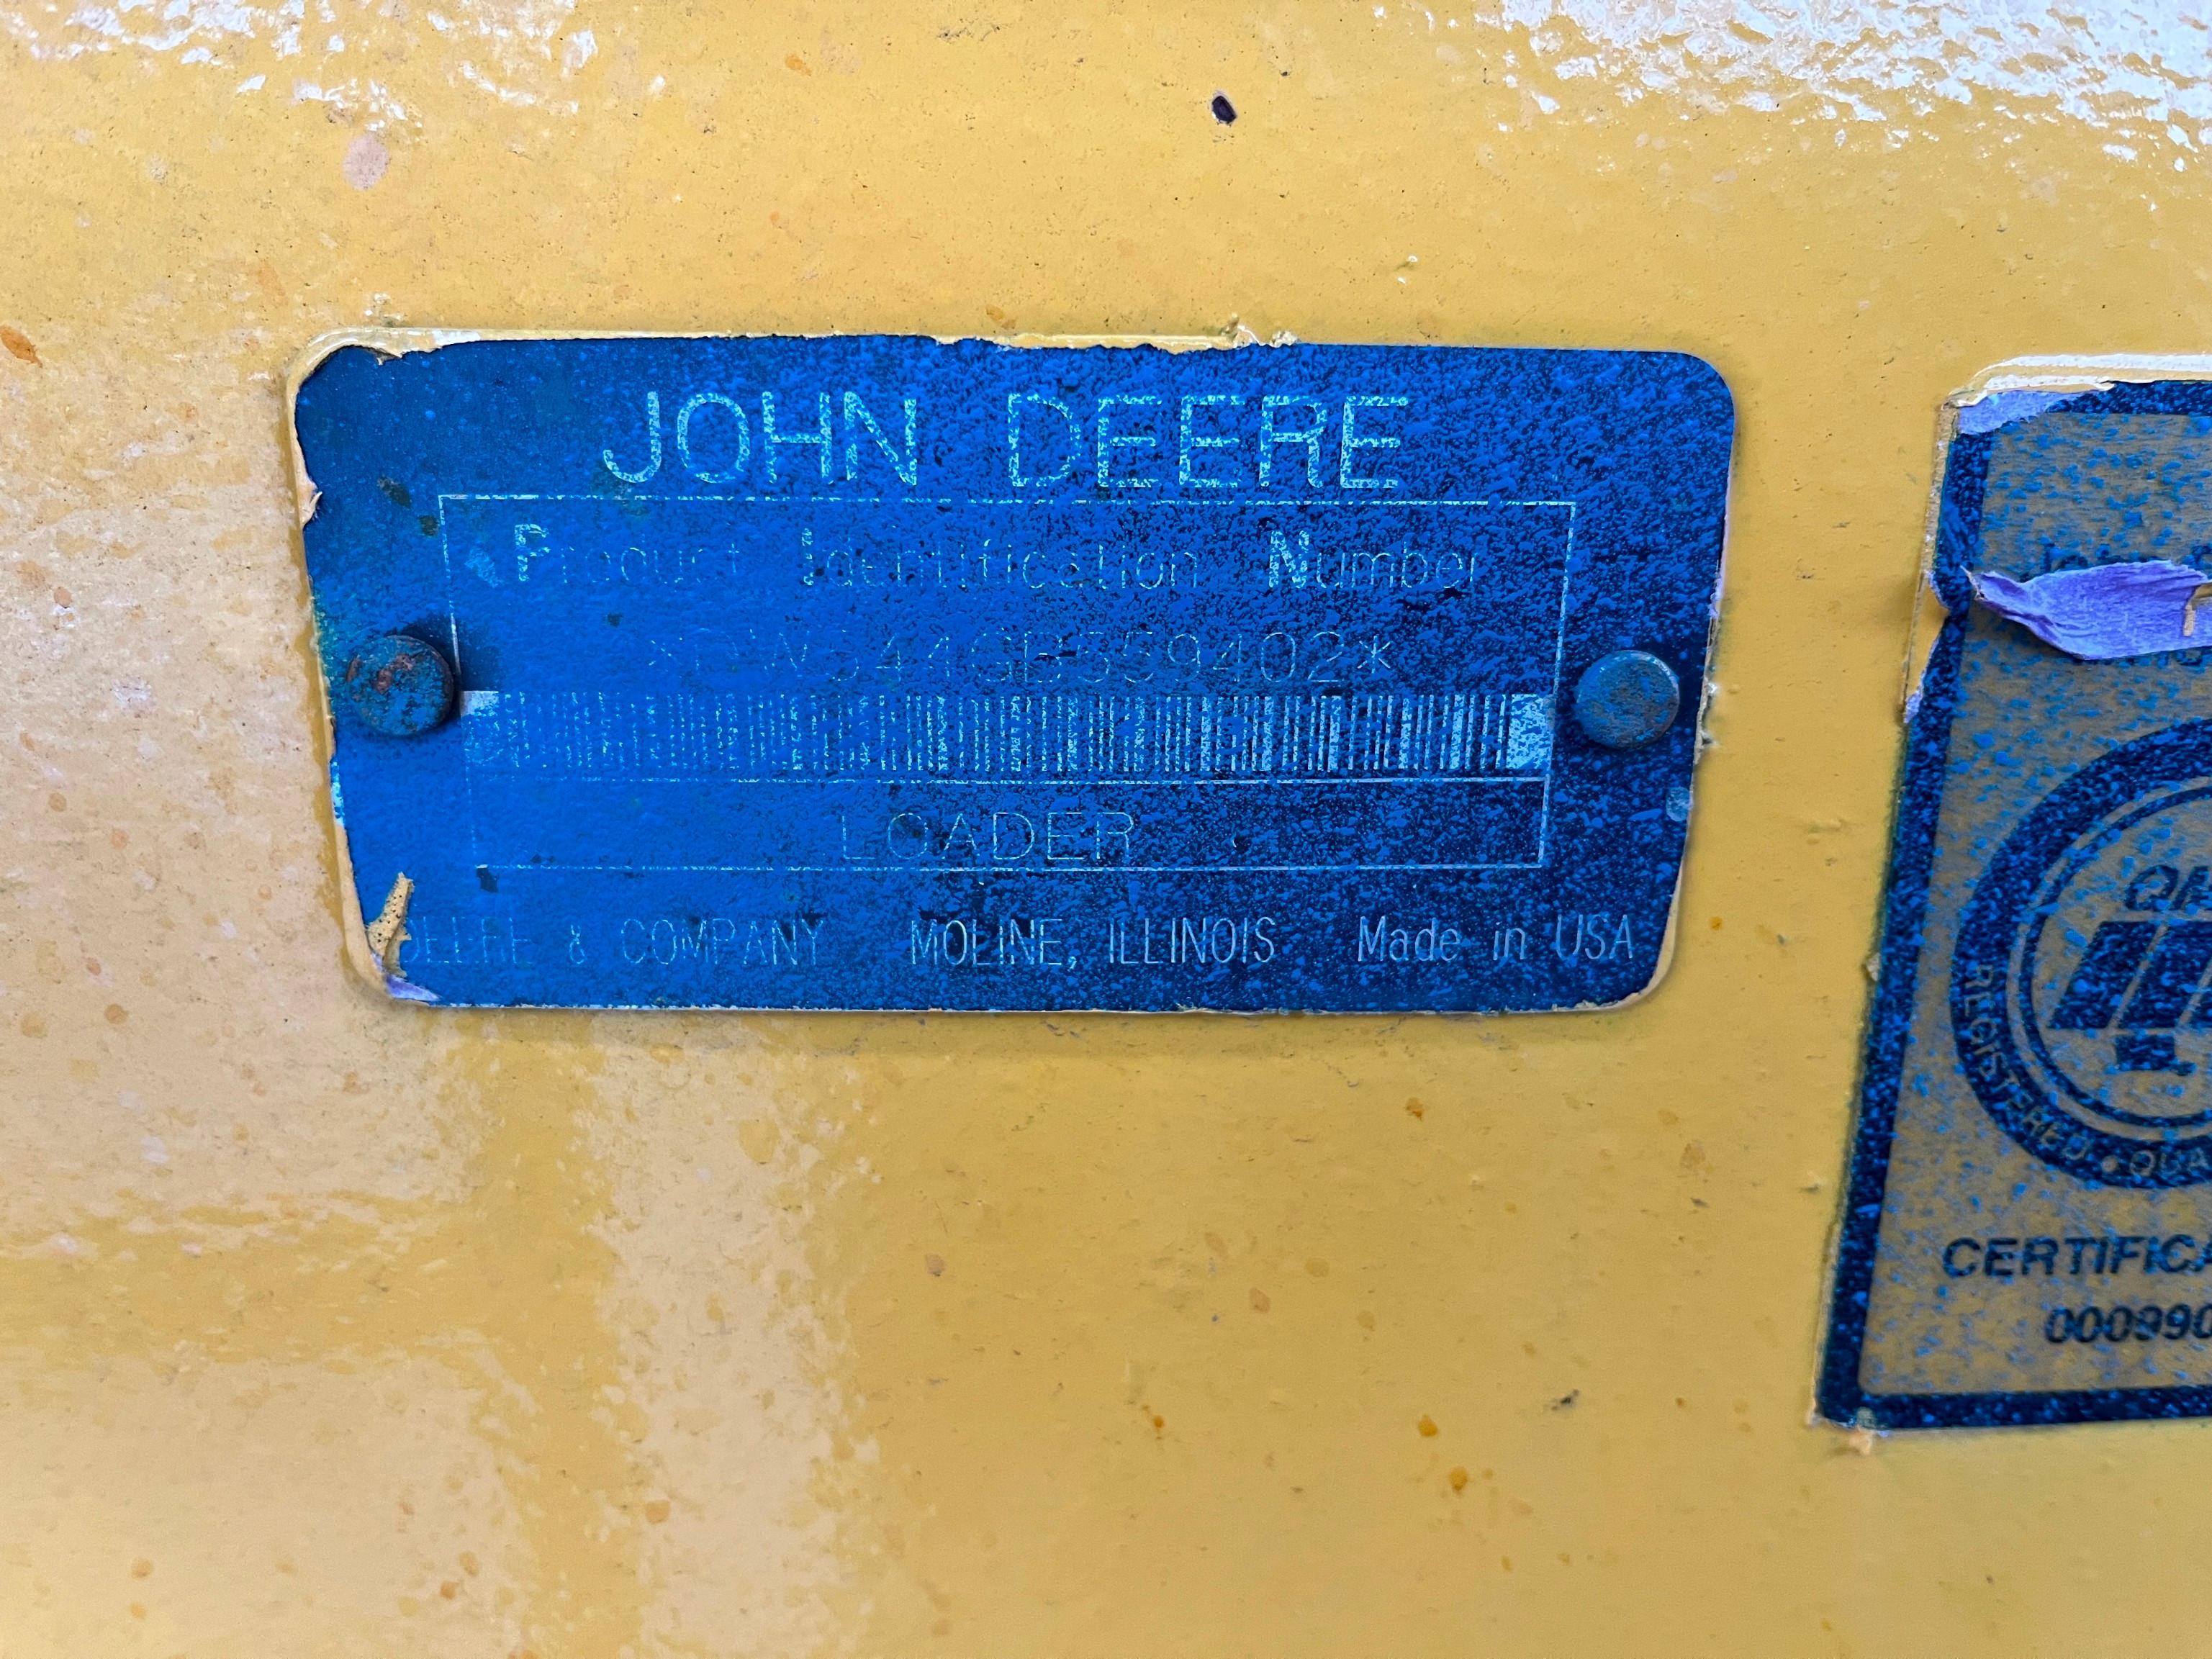 JOHN DEERE 544G RUBBER TIRED LOADER SN:559402 powered by John Deere diesel engine, equipped with